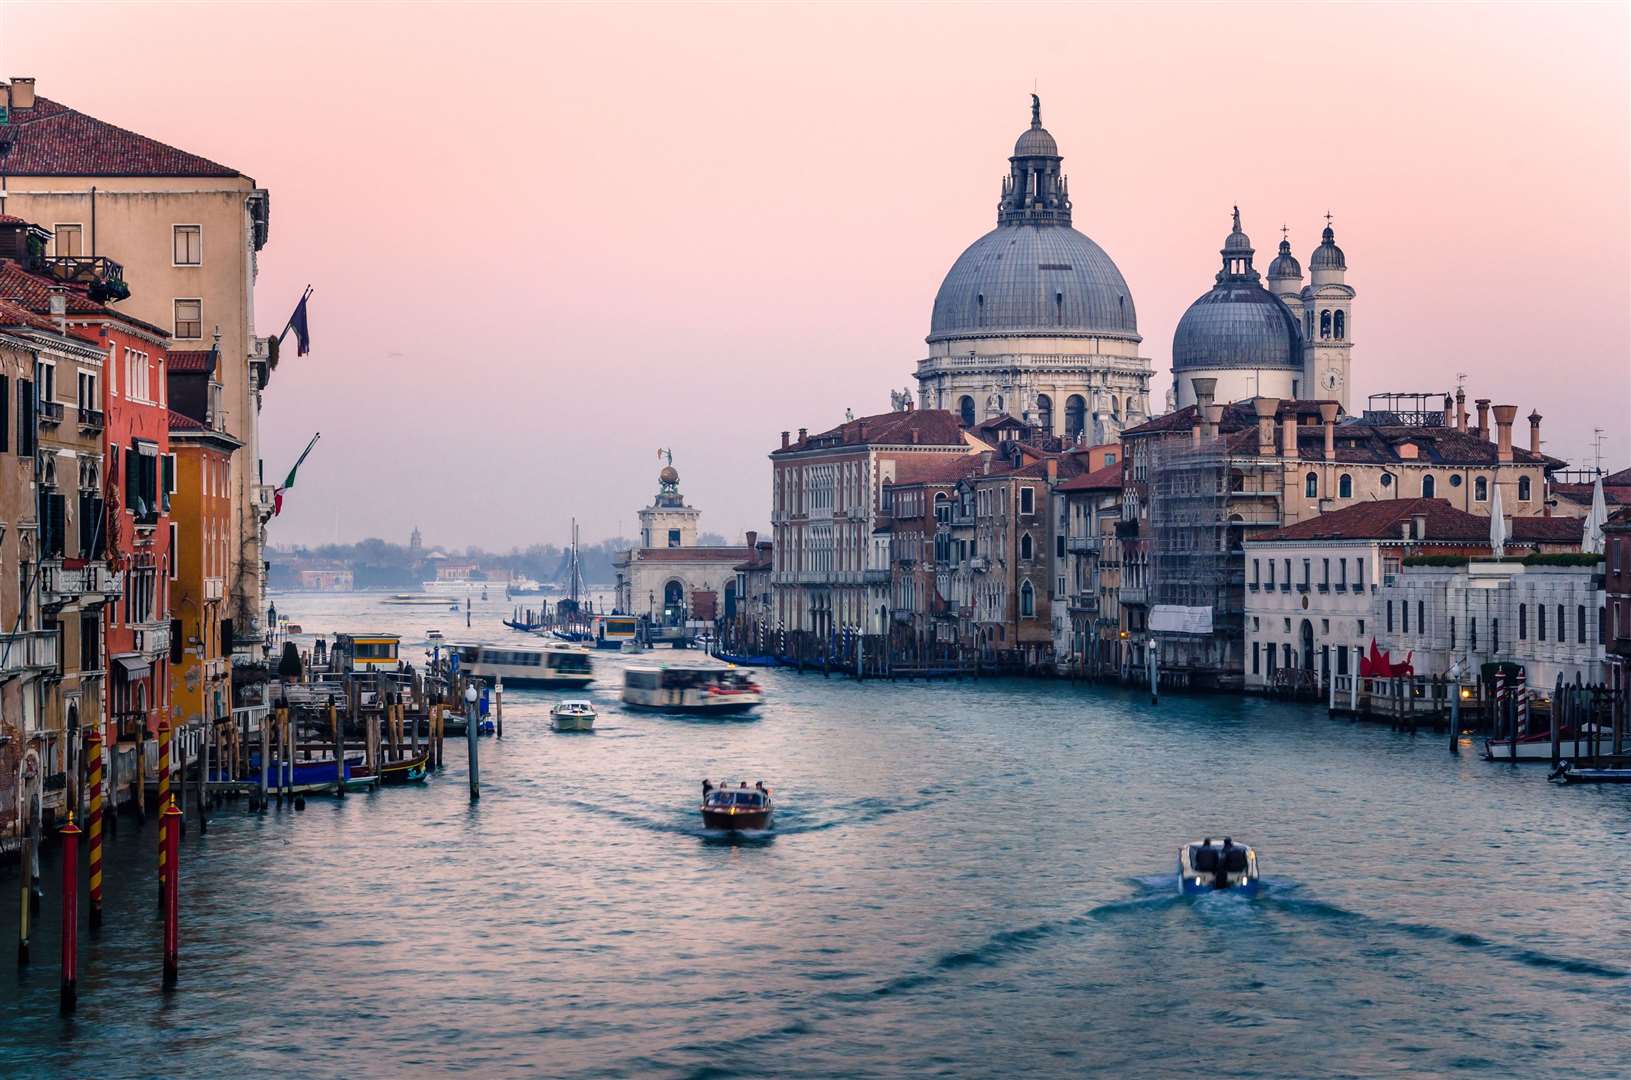 Visitors to Venice must not feed the pigeons. Image: iStock